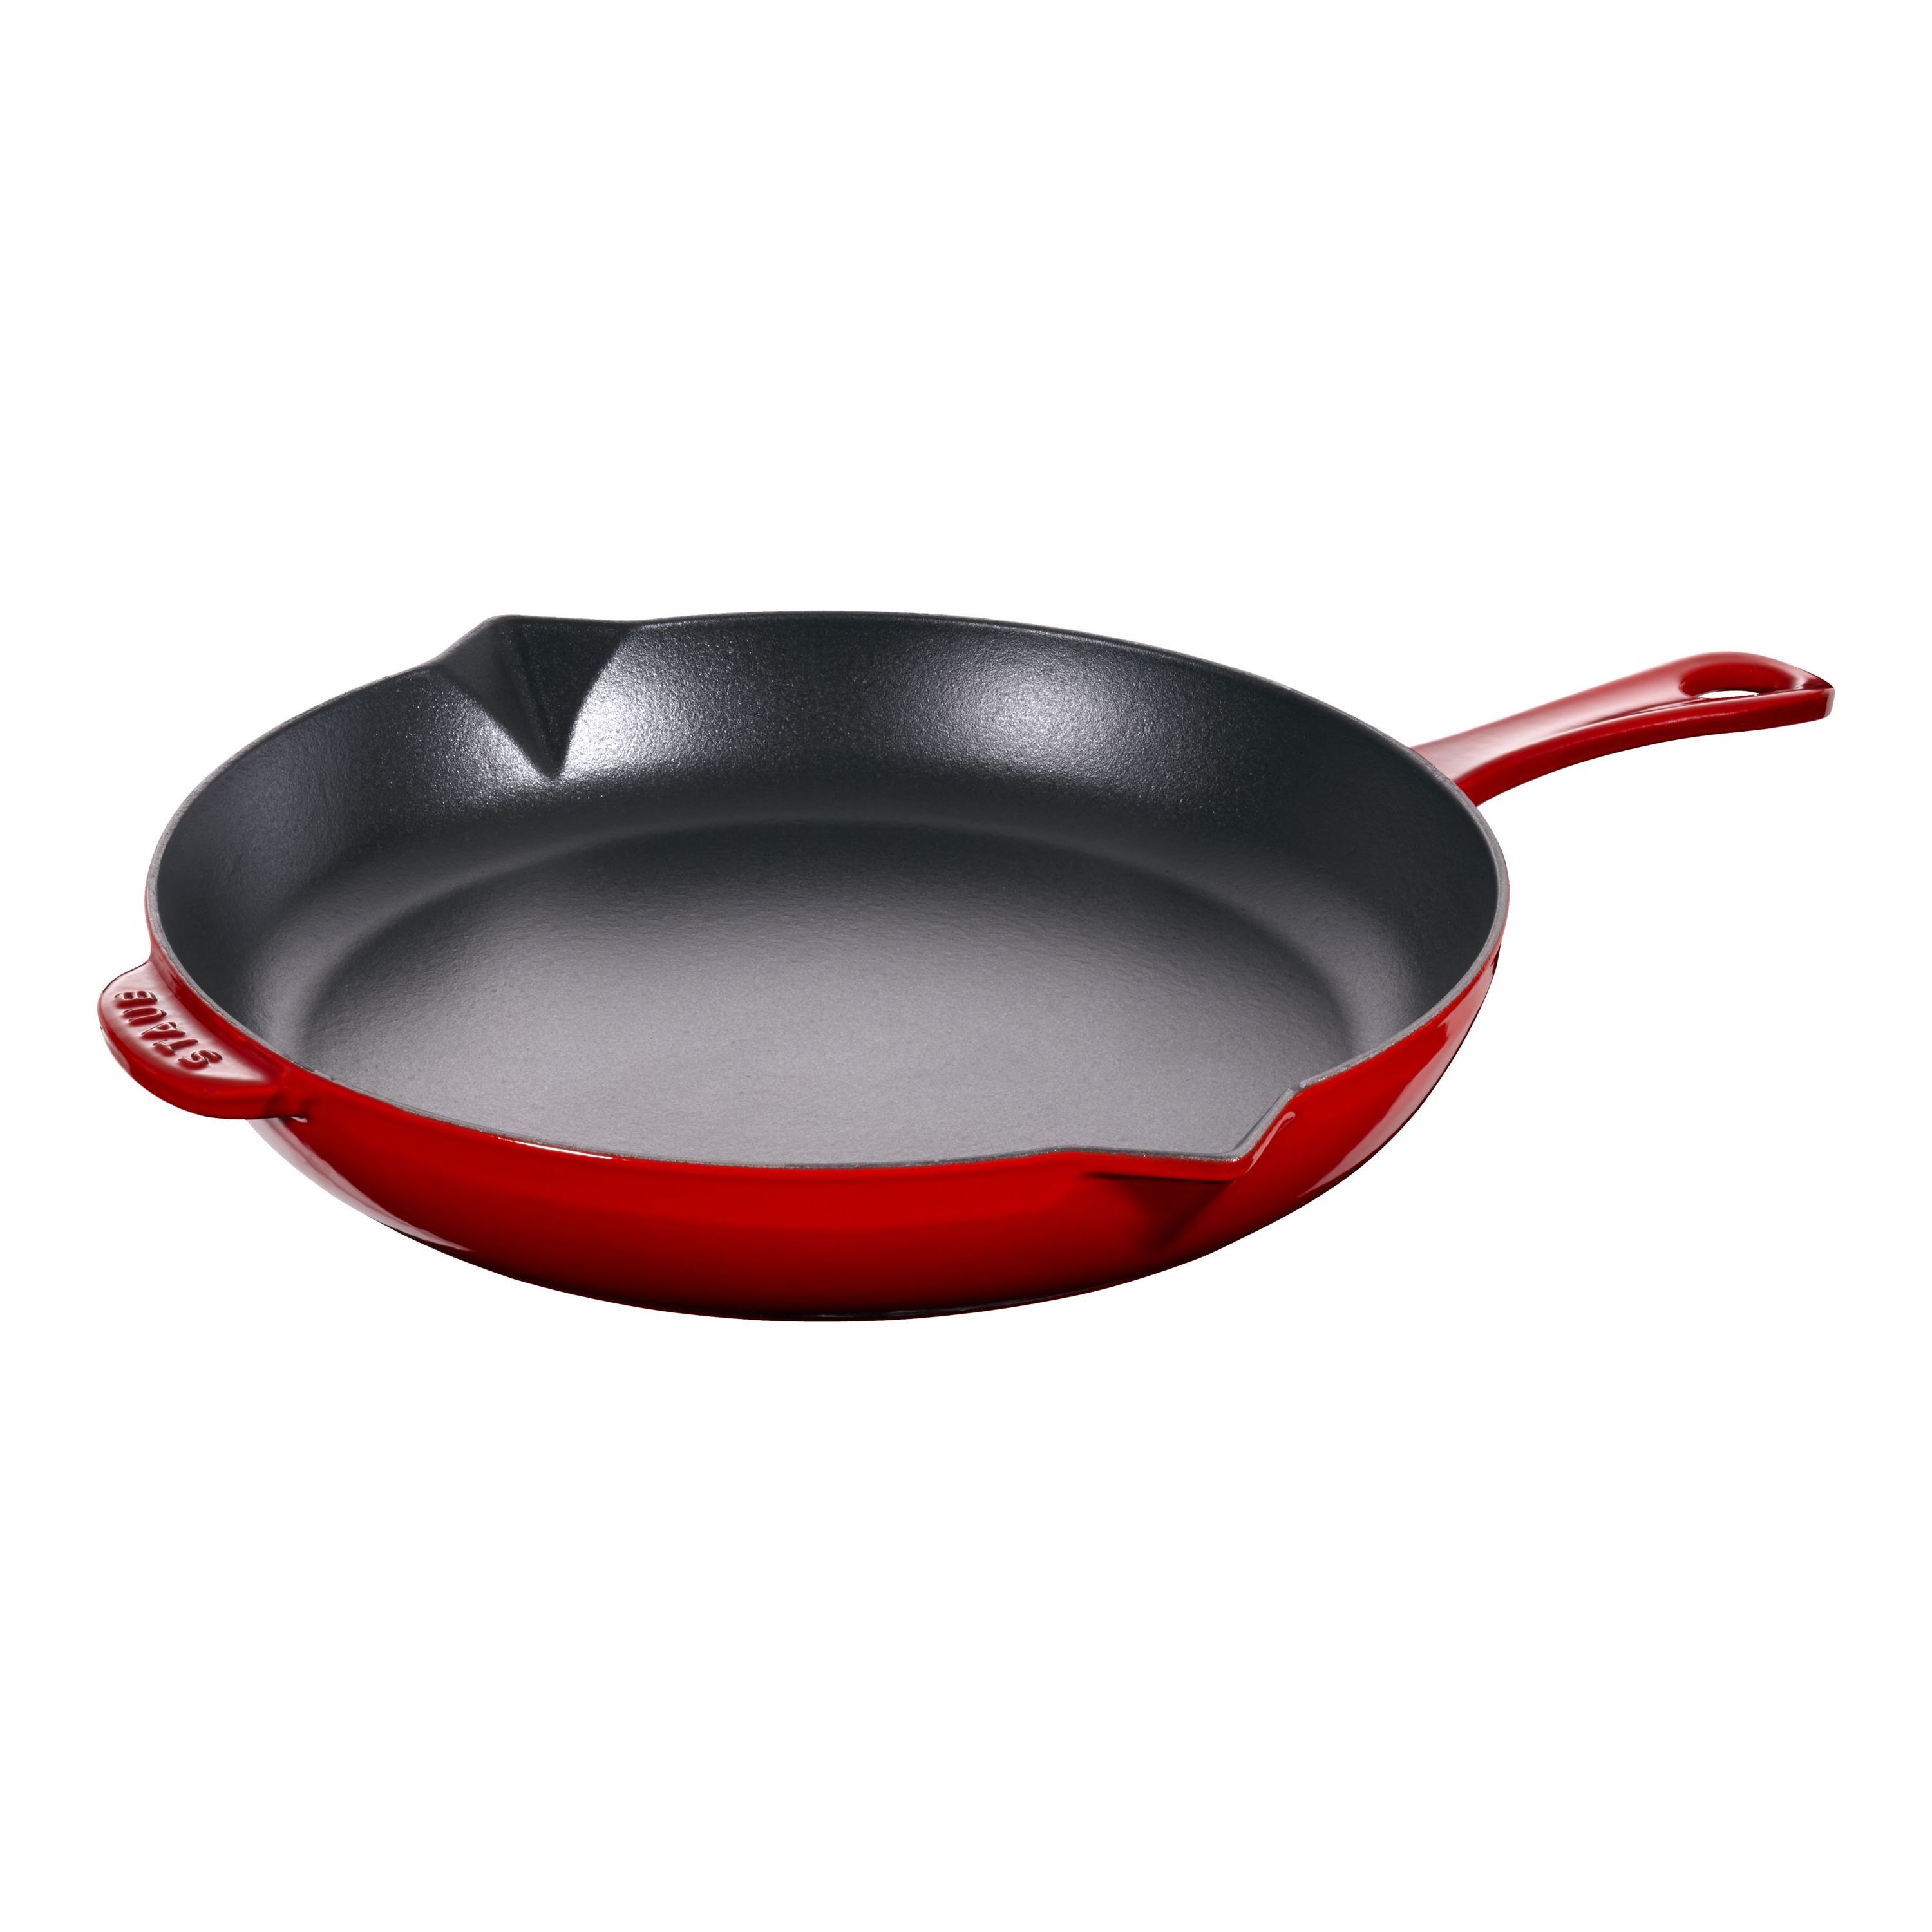 Wido Cast Iron Griddle Pan Non Stick For Gas Induction & Electric Hobs Red Enamel Pots Kitchen Oven 